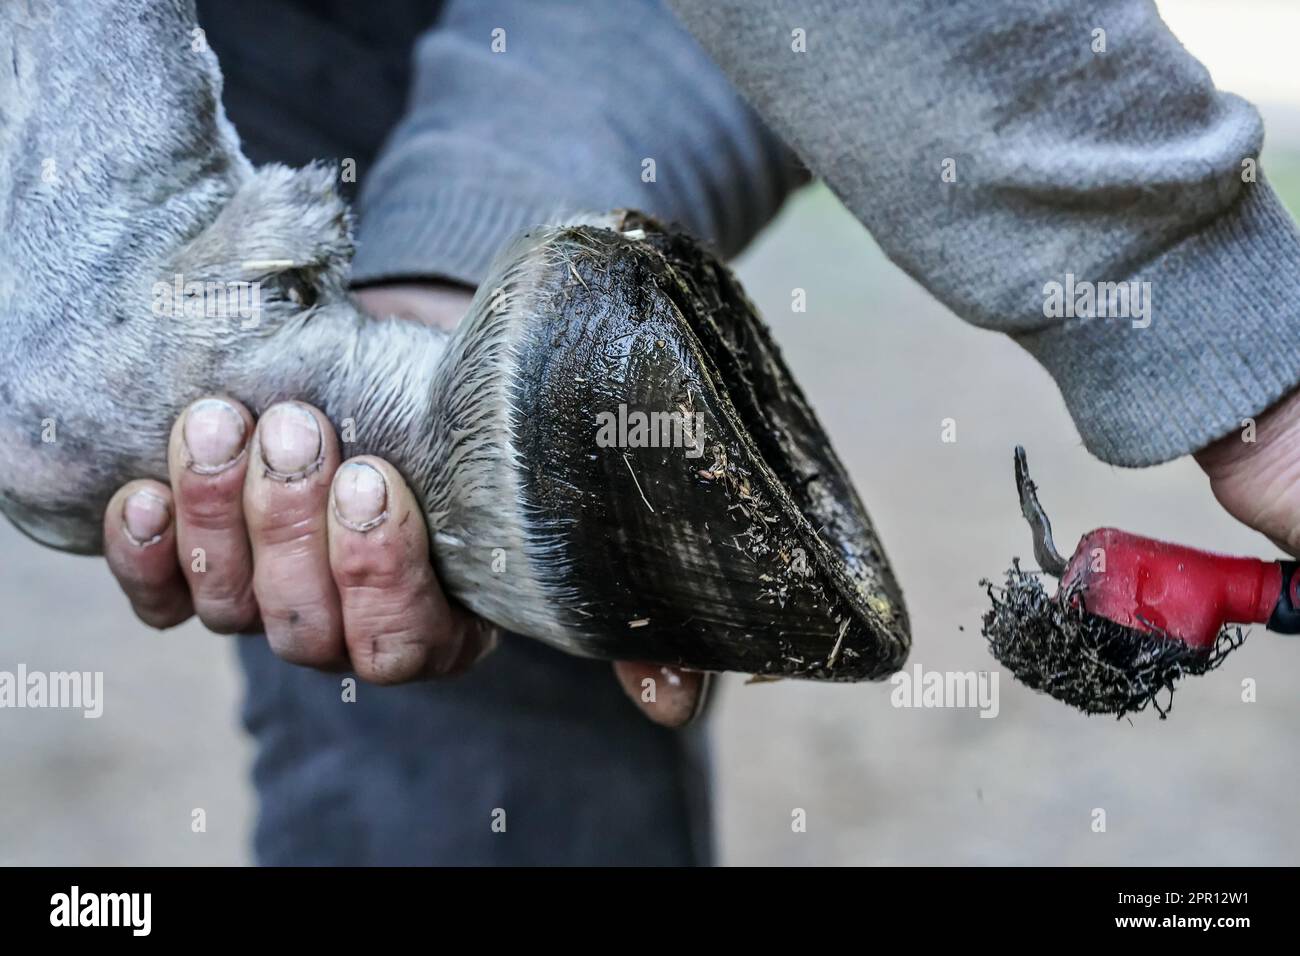 Man farrier using pick knife tool to clean horse hoof, before applying new horseshoe. Closeup up detail to hands holding wet animal feet Stock Photo